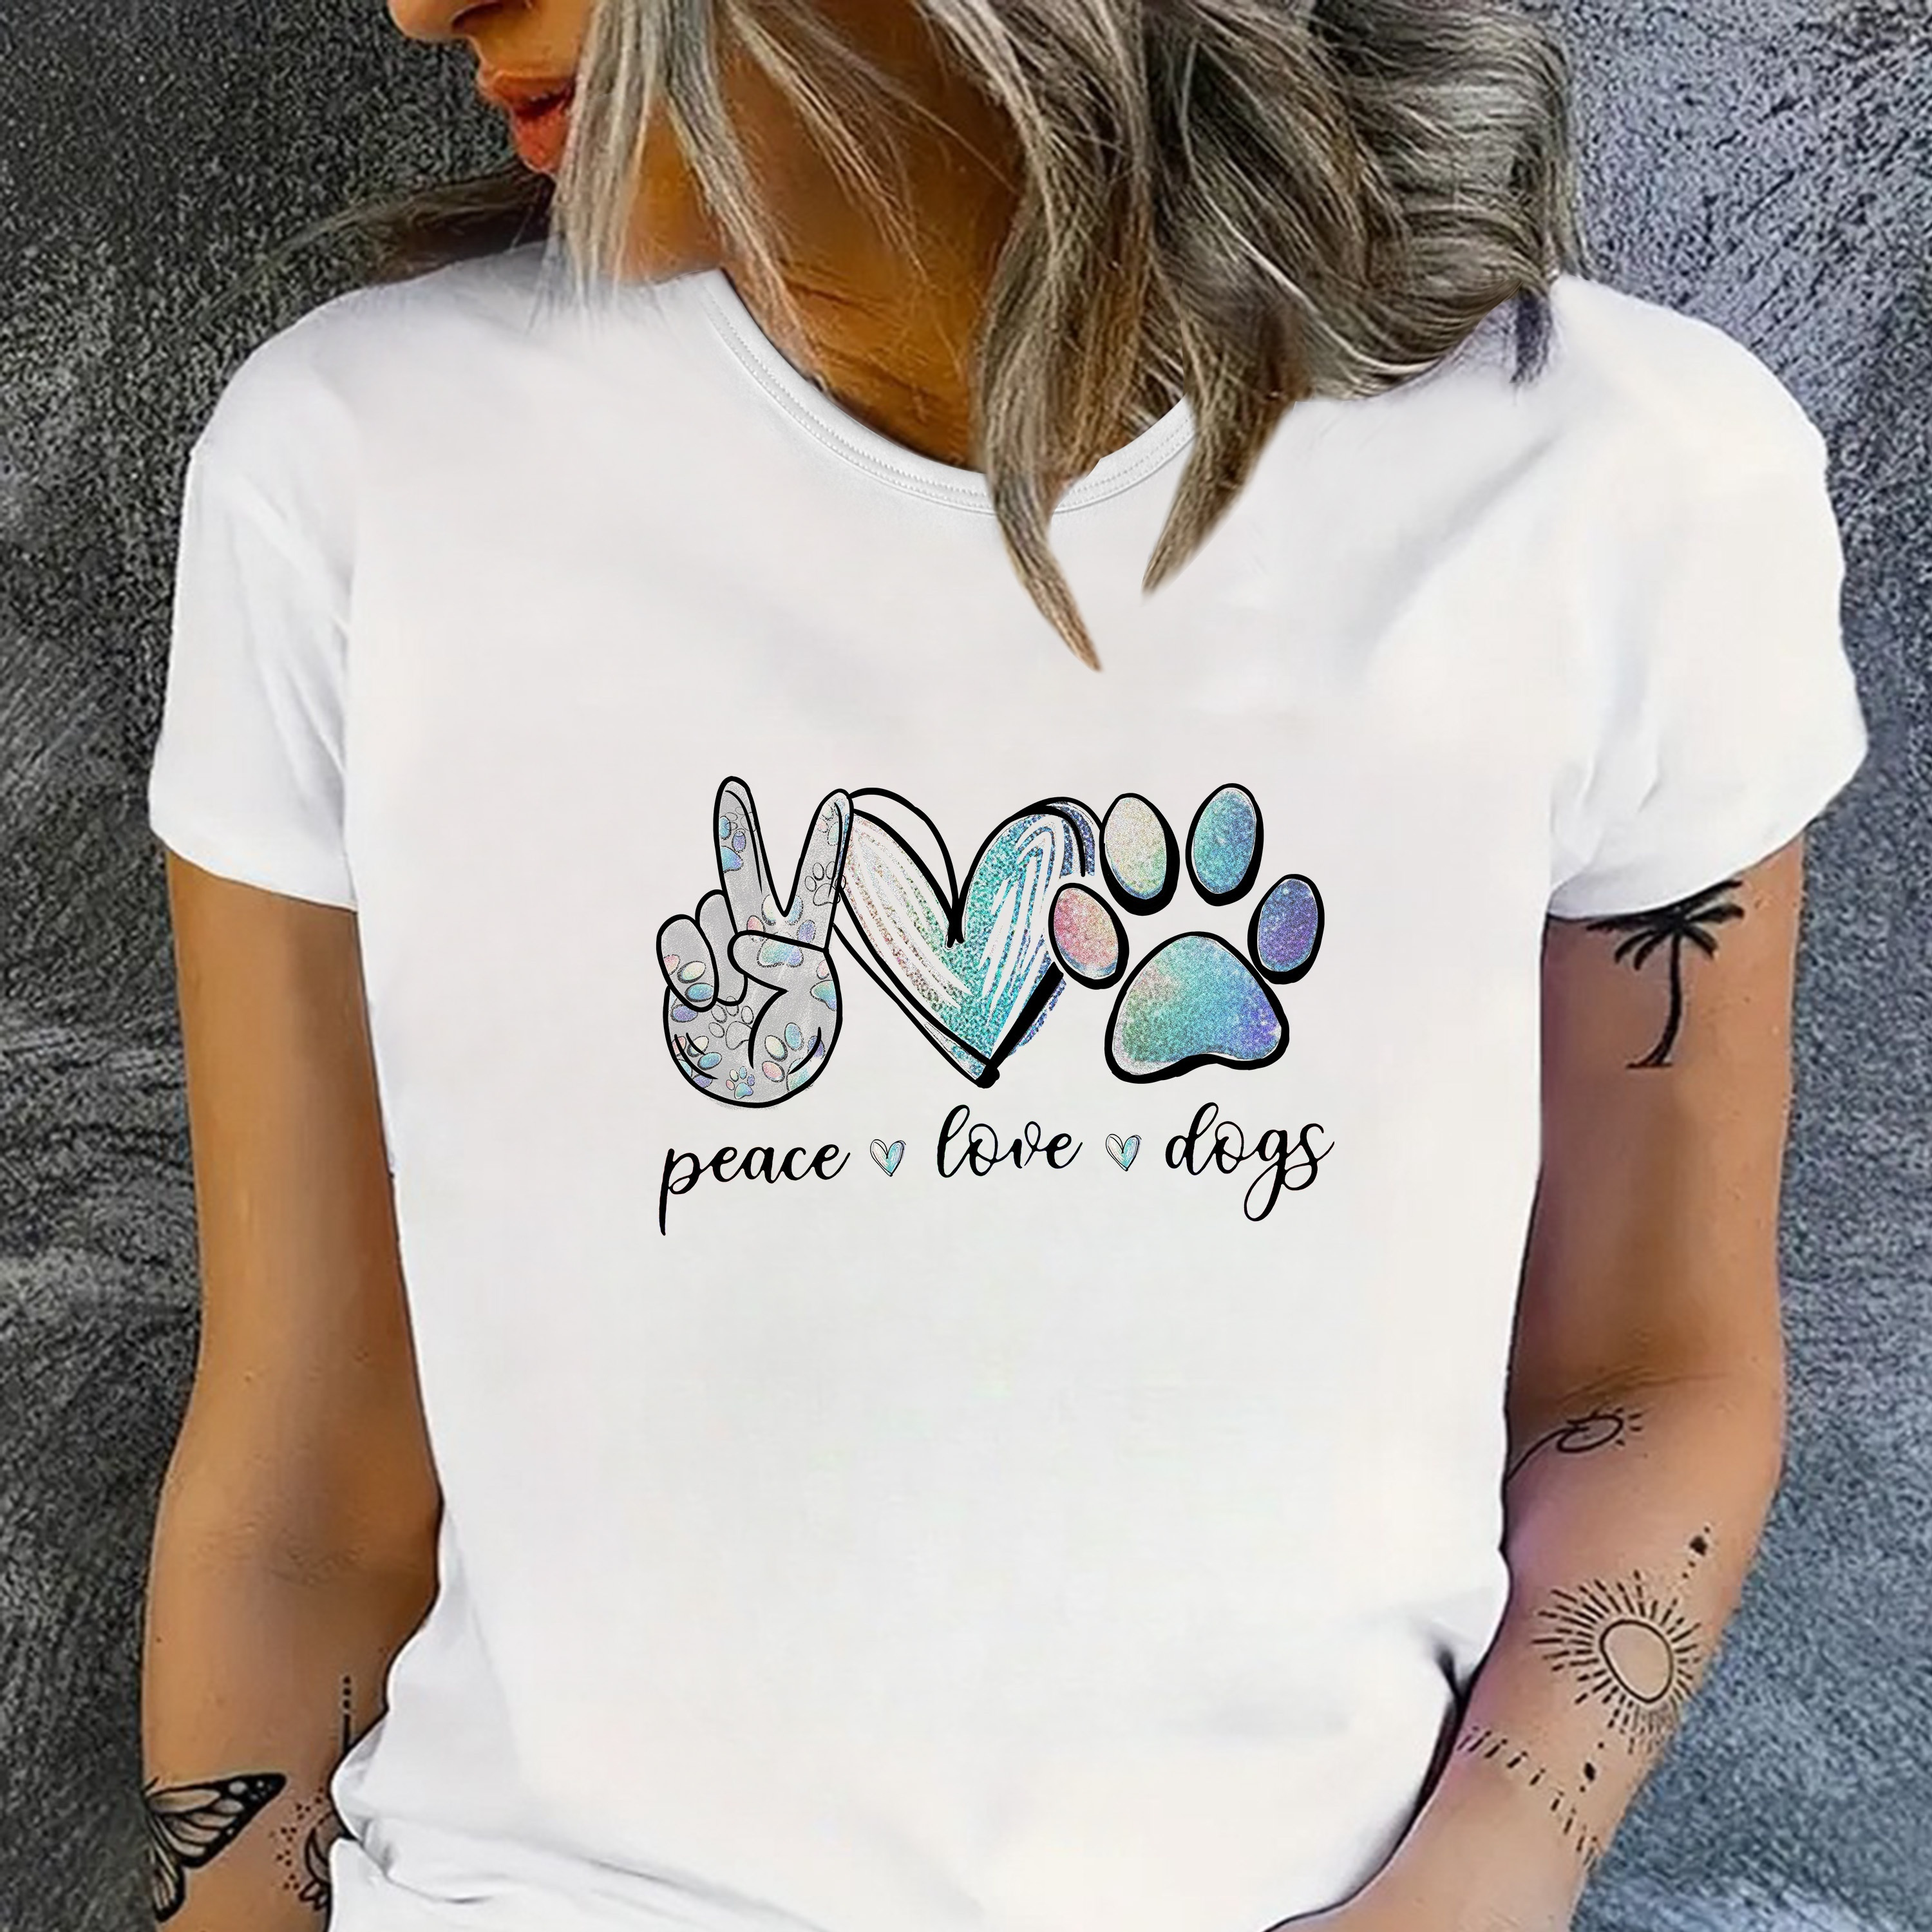 

Peace Love Dogs Print T-shirt, Short Sleeve Crew Neck Casual Top For Summer & Spring, Women's Clothing